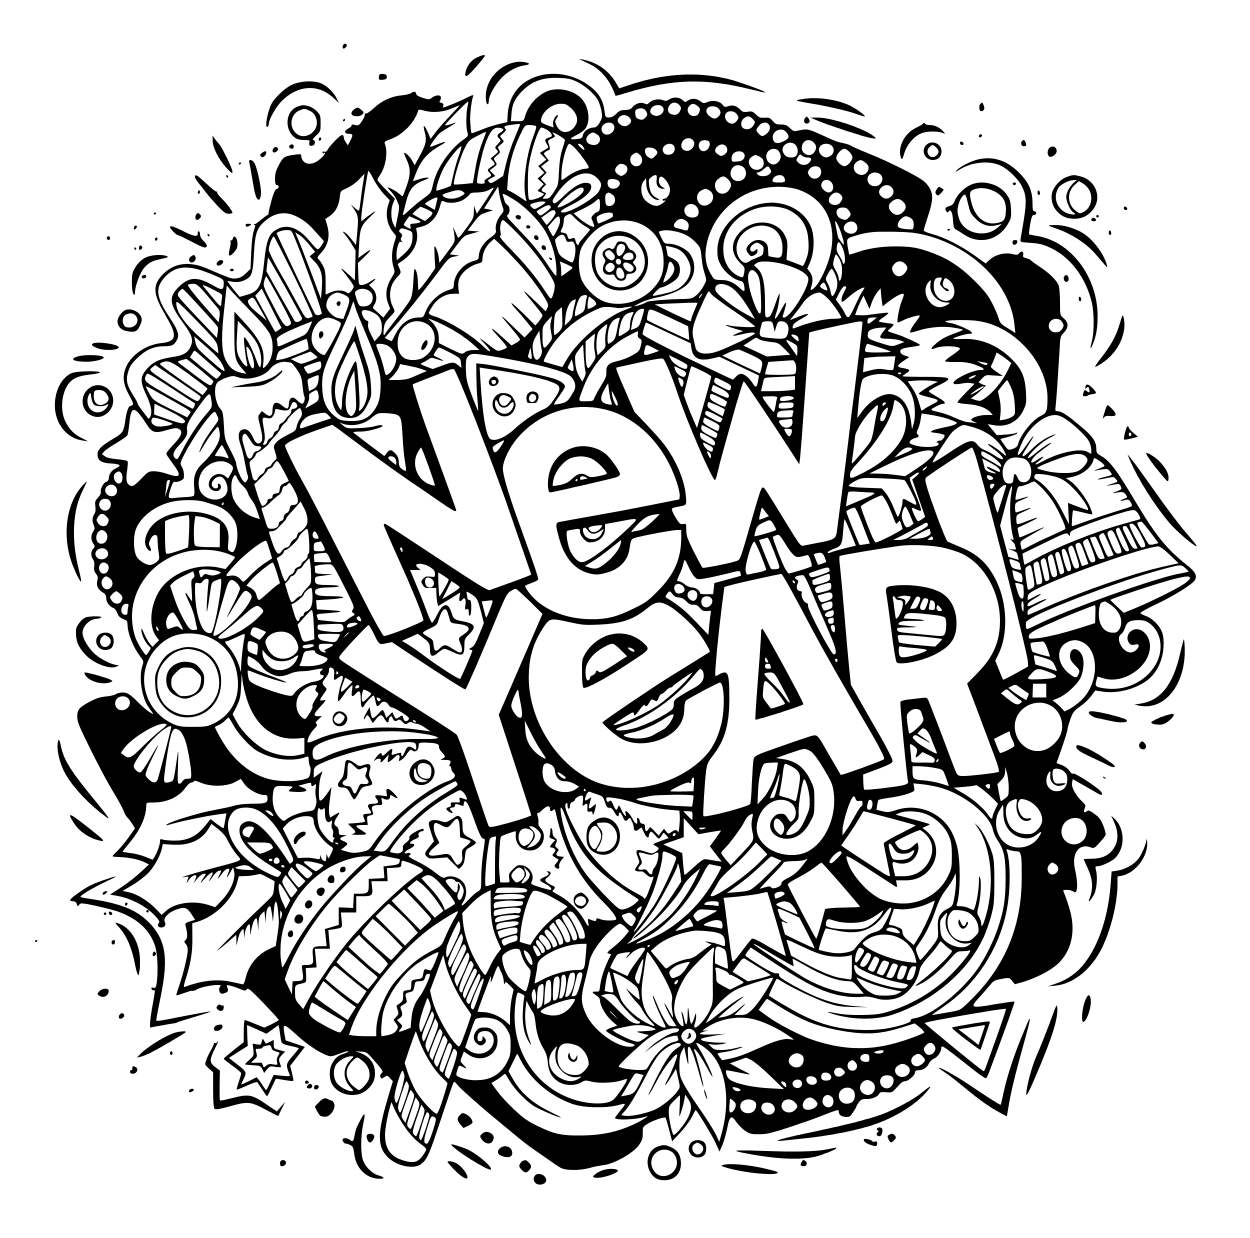 New Year Doodles Objects And Elements Coloring Page